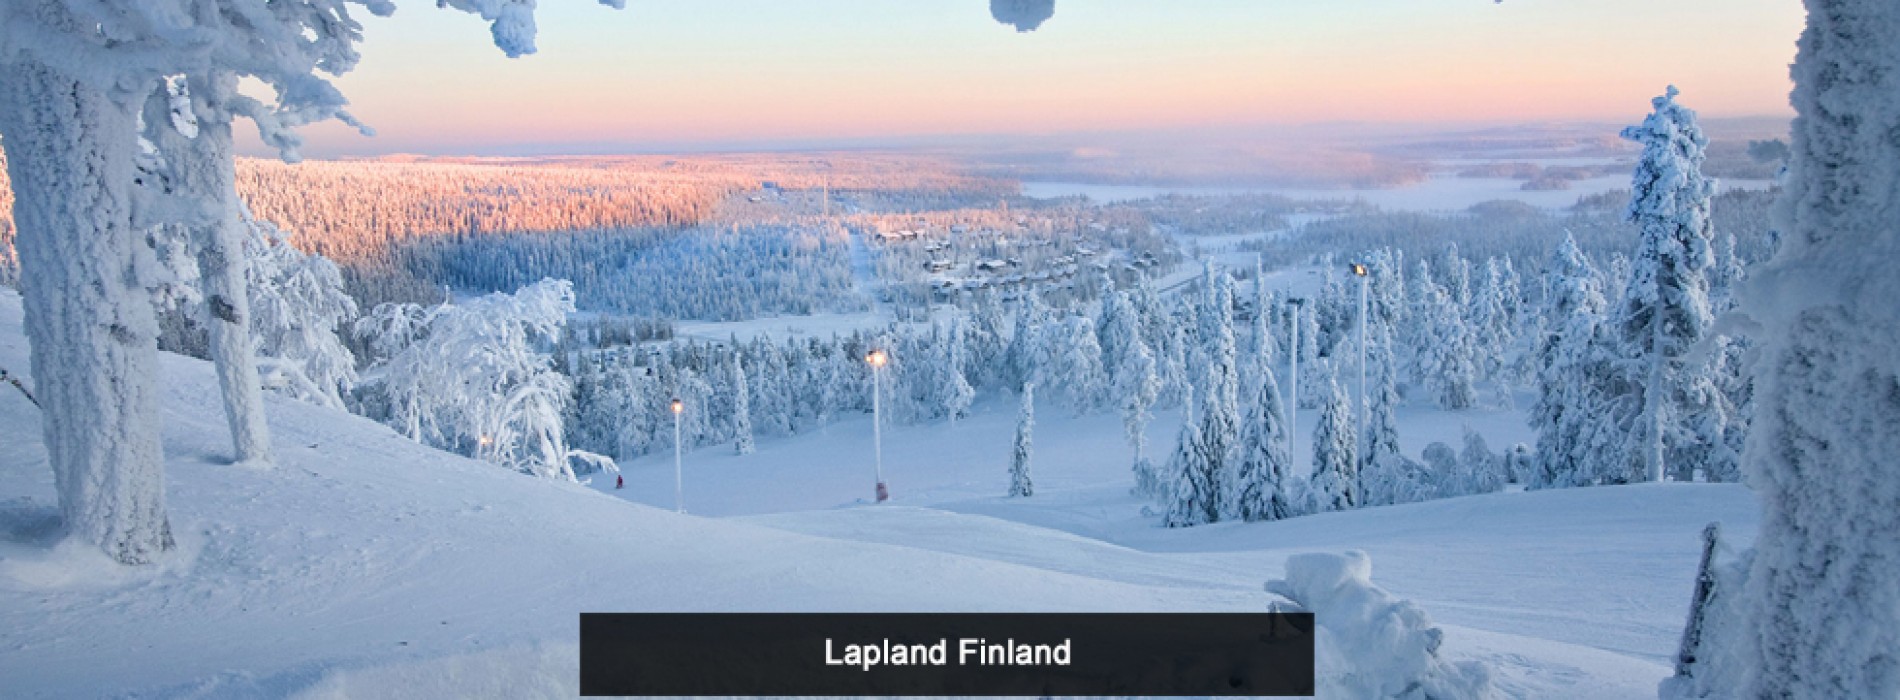 Finland: a glorious country of varied landscapes and stunning natural beauty